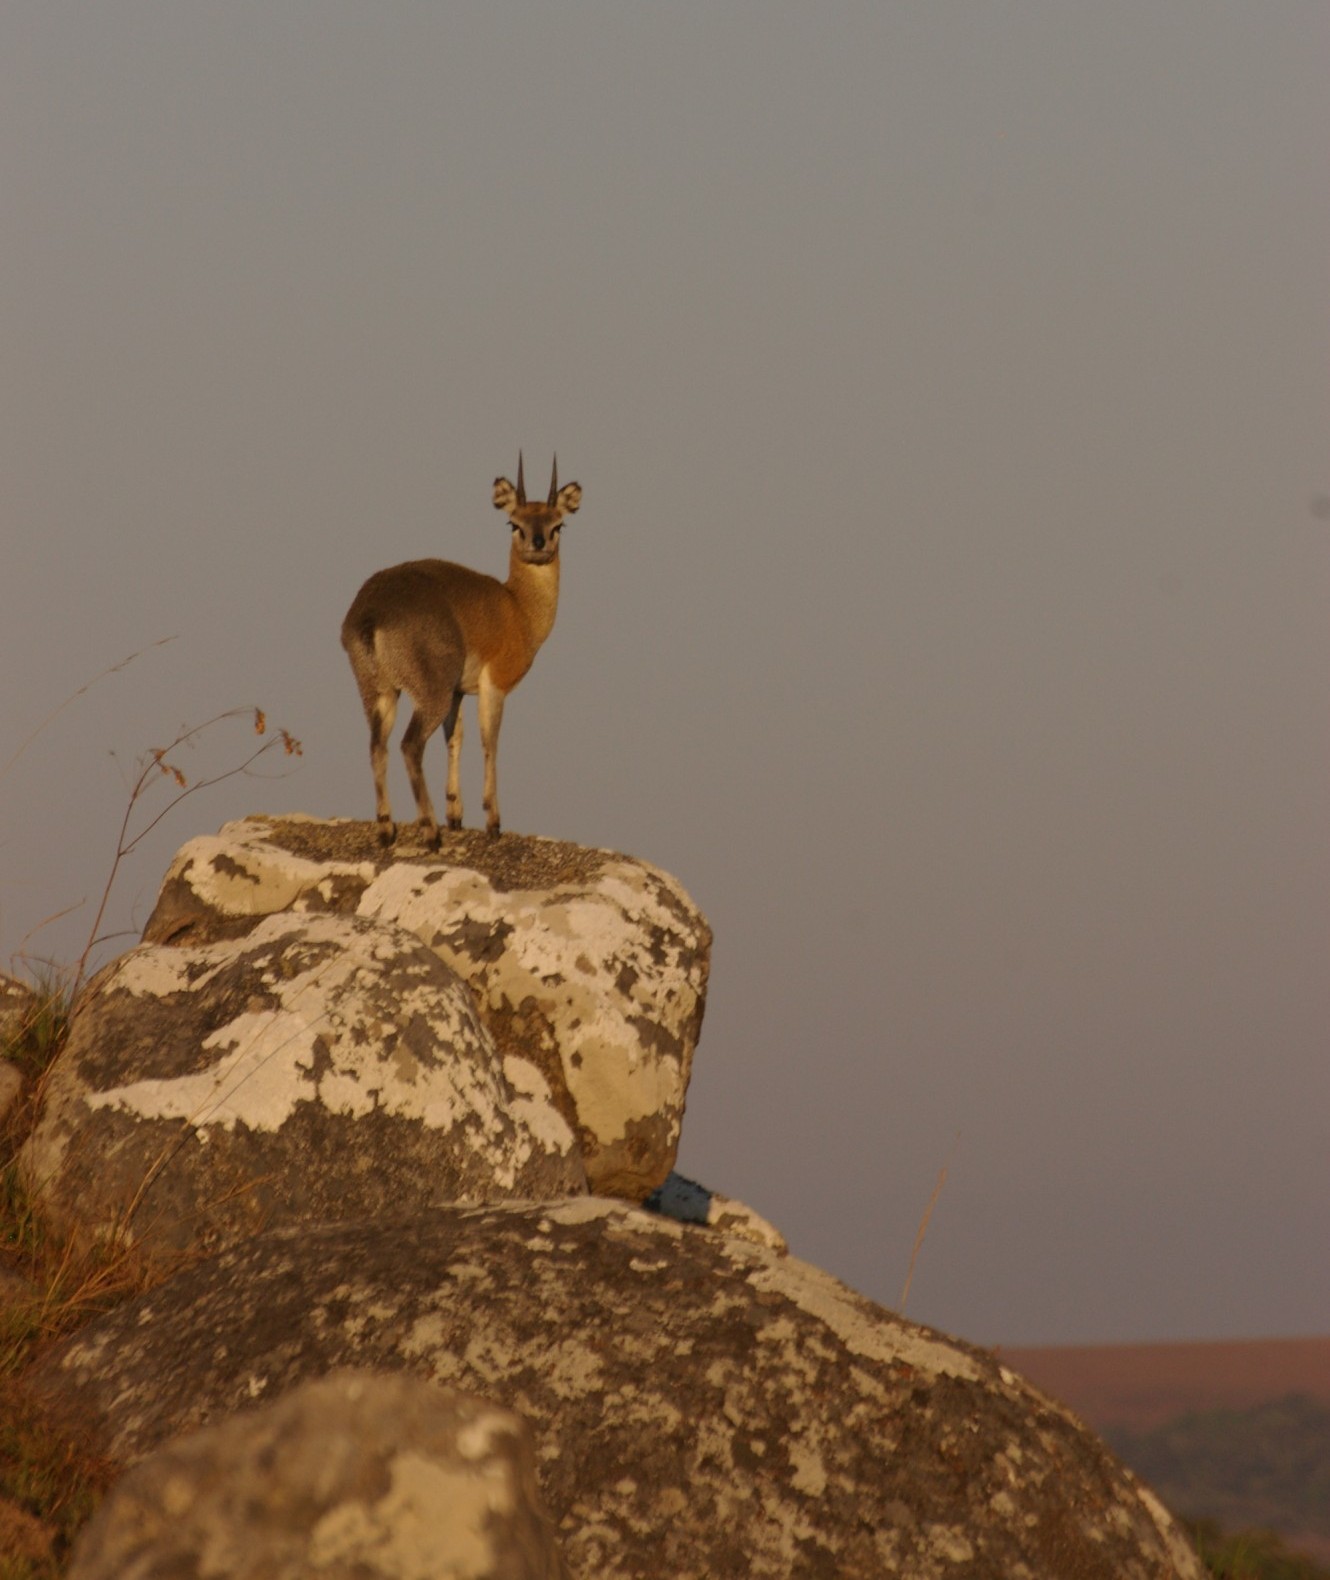 The klipspringer antelope is standing on top of a rocky crag, body facing away, but head turned so that it looks at the camera. 